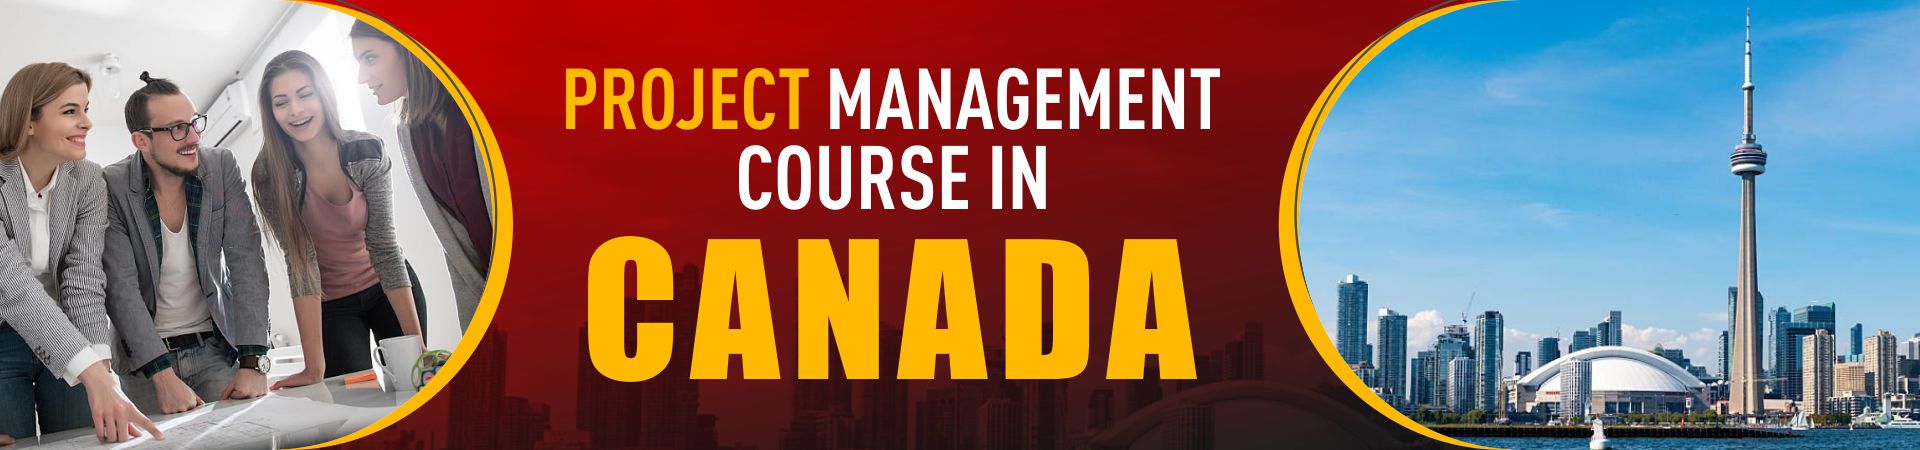 Project Management course in Canada